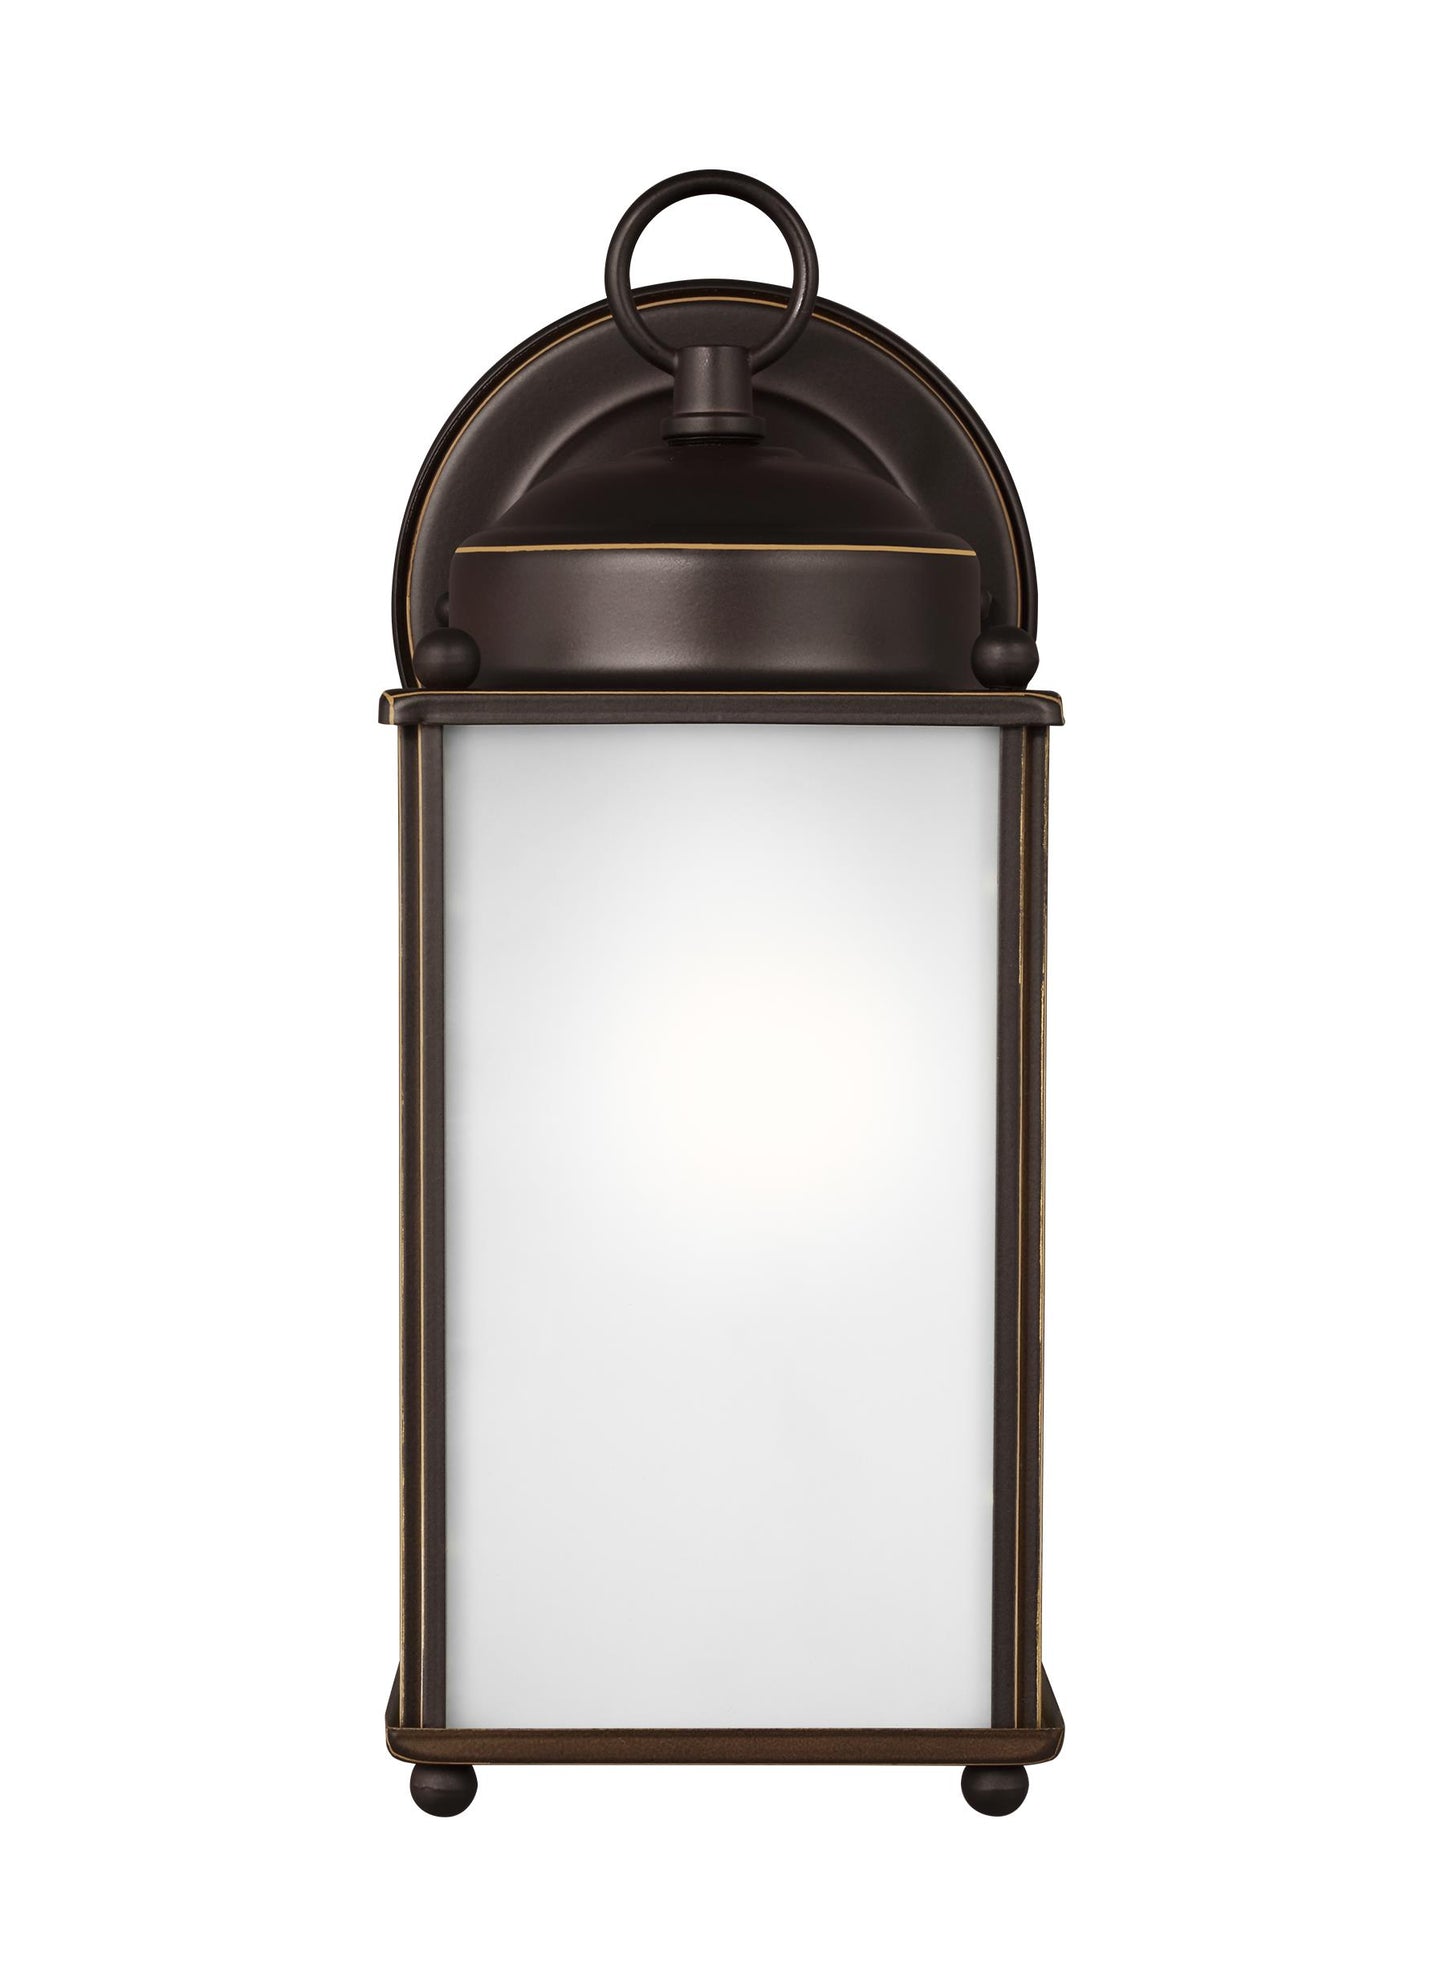 New Castle traditional 1-light outdoor exterior large wall lantern sconce in antique bronze finish with satin etched glass...